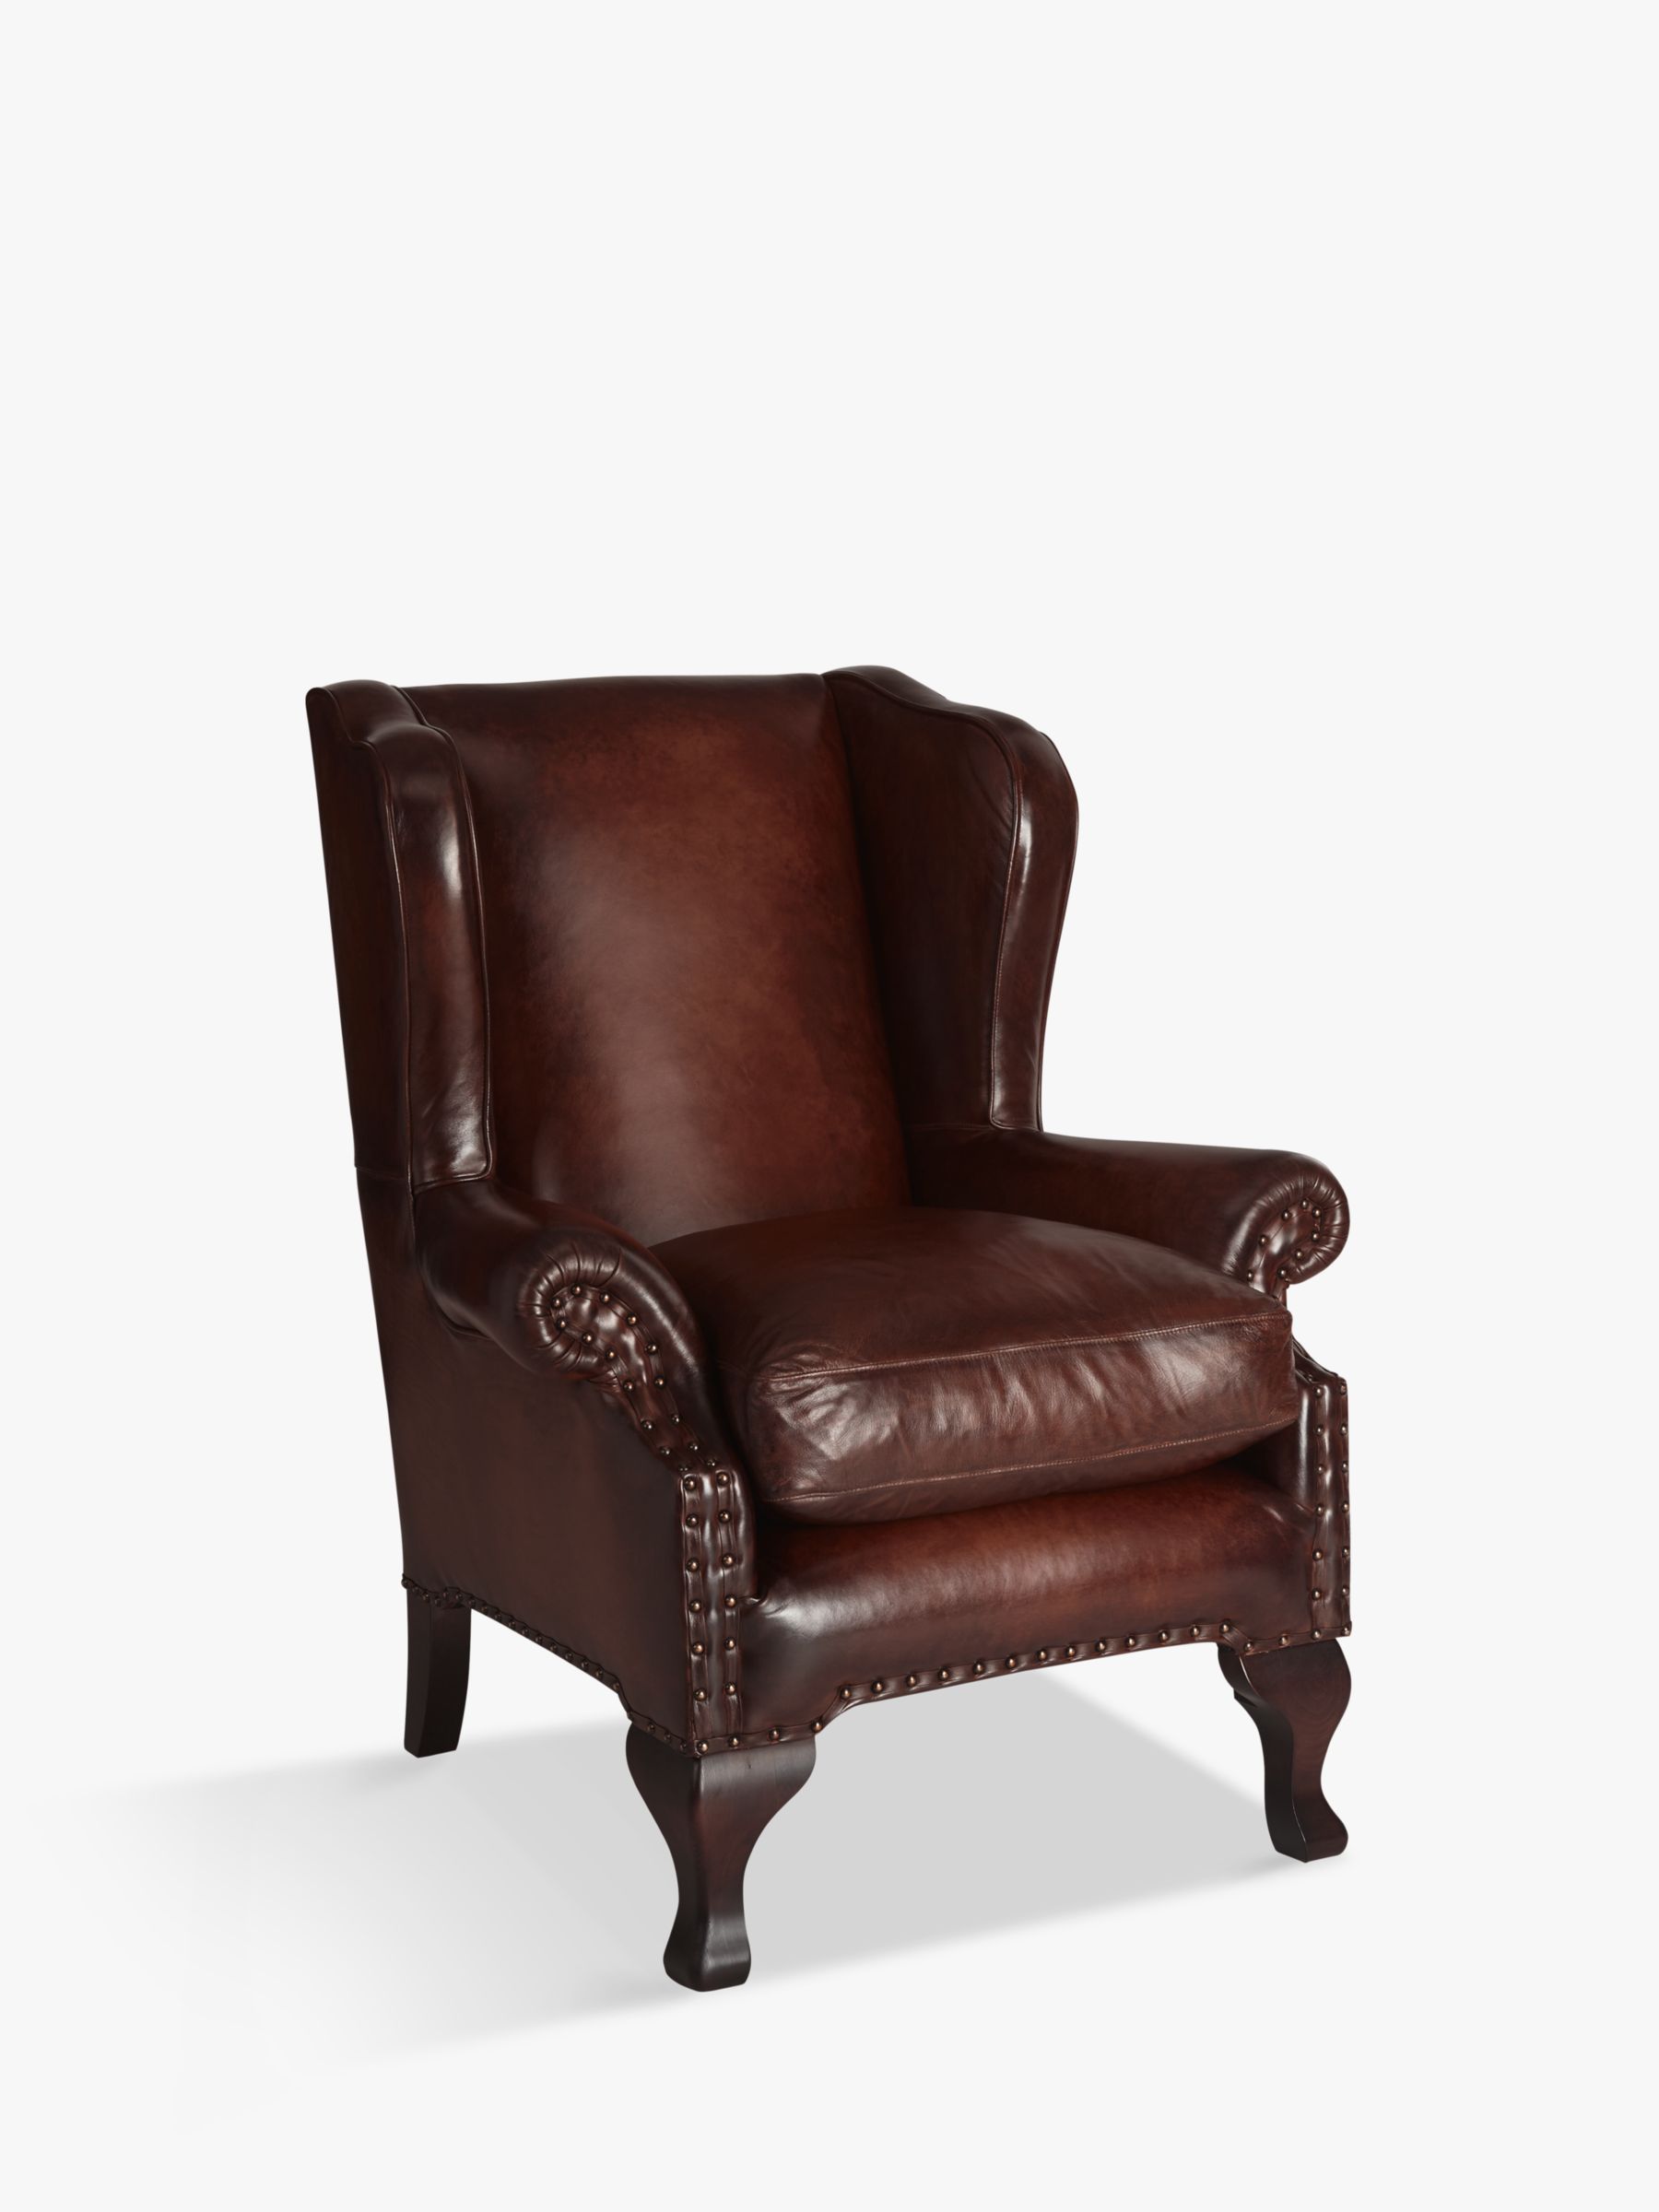 Compton Leather Wing Chair, Antiqued